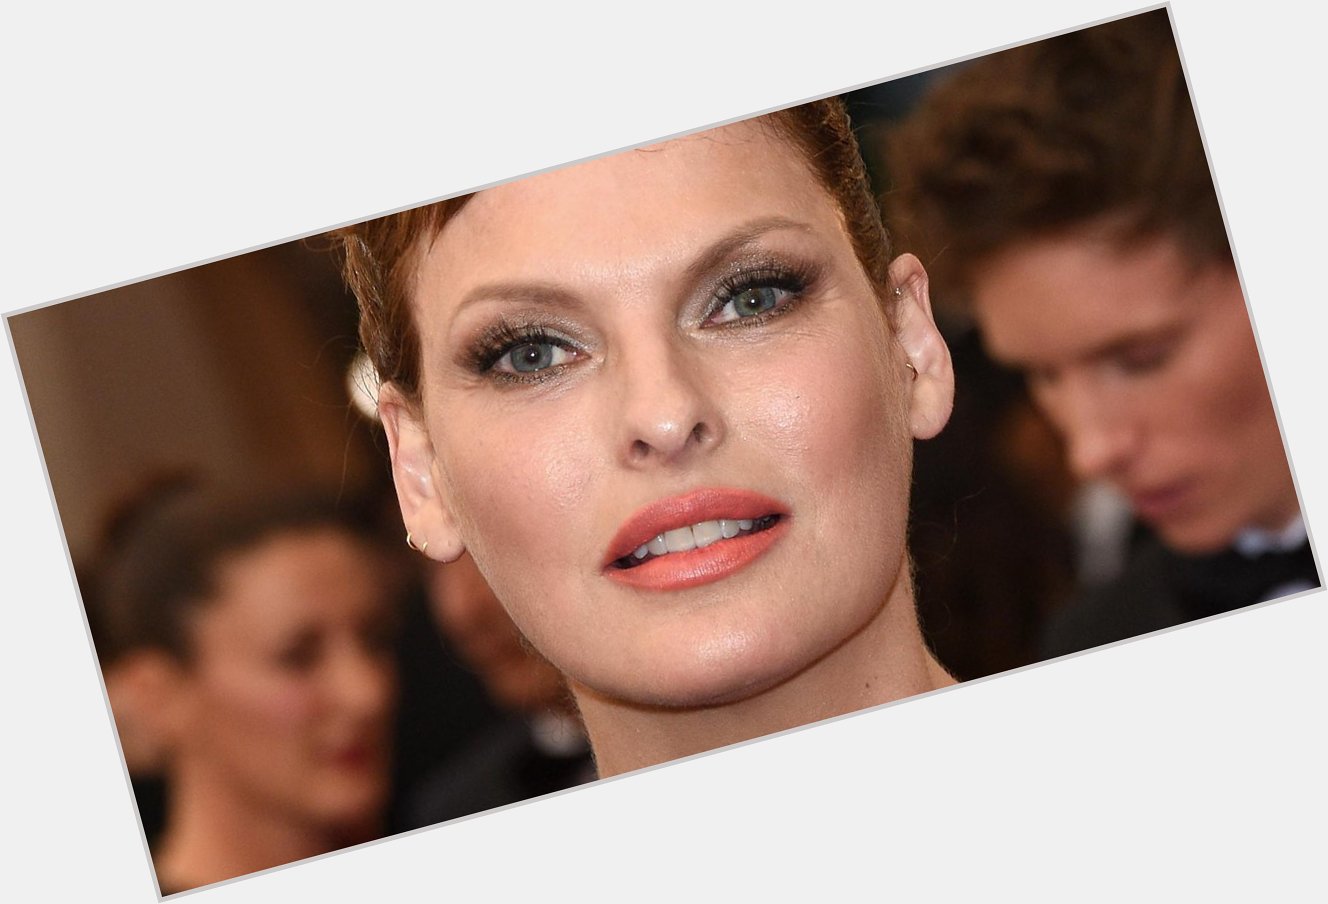 Happy Birthday, Linda Evangelista! The Original Supermodel Turns 50 And Is Happy About 